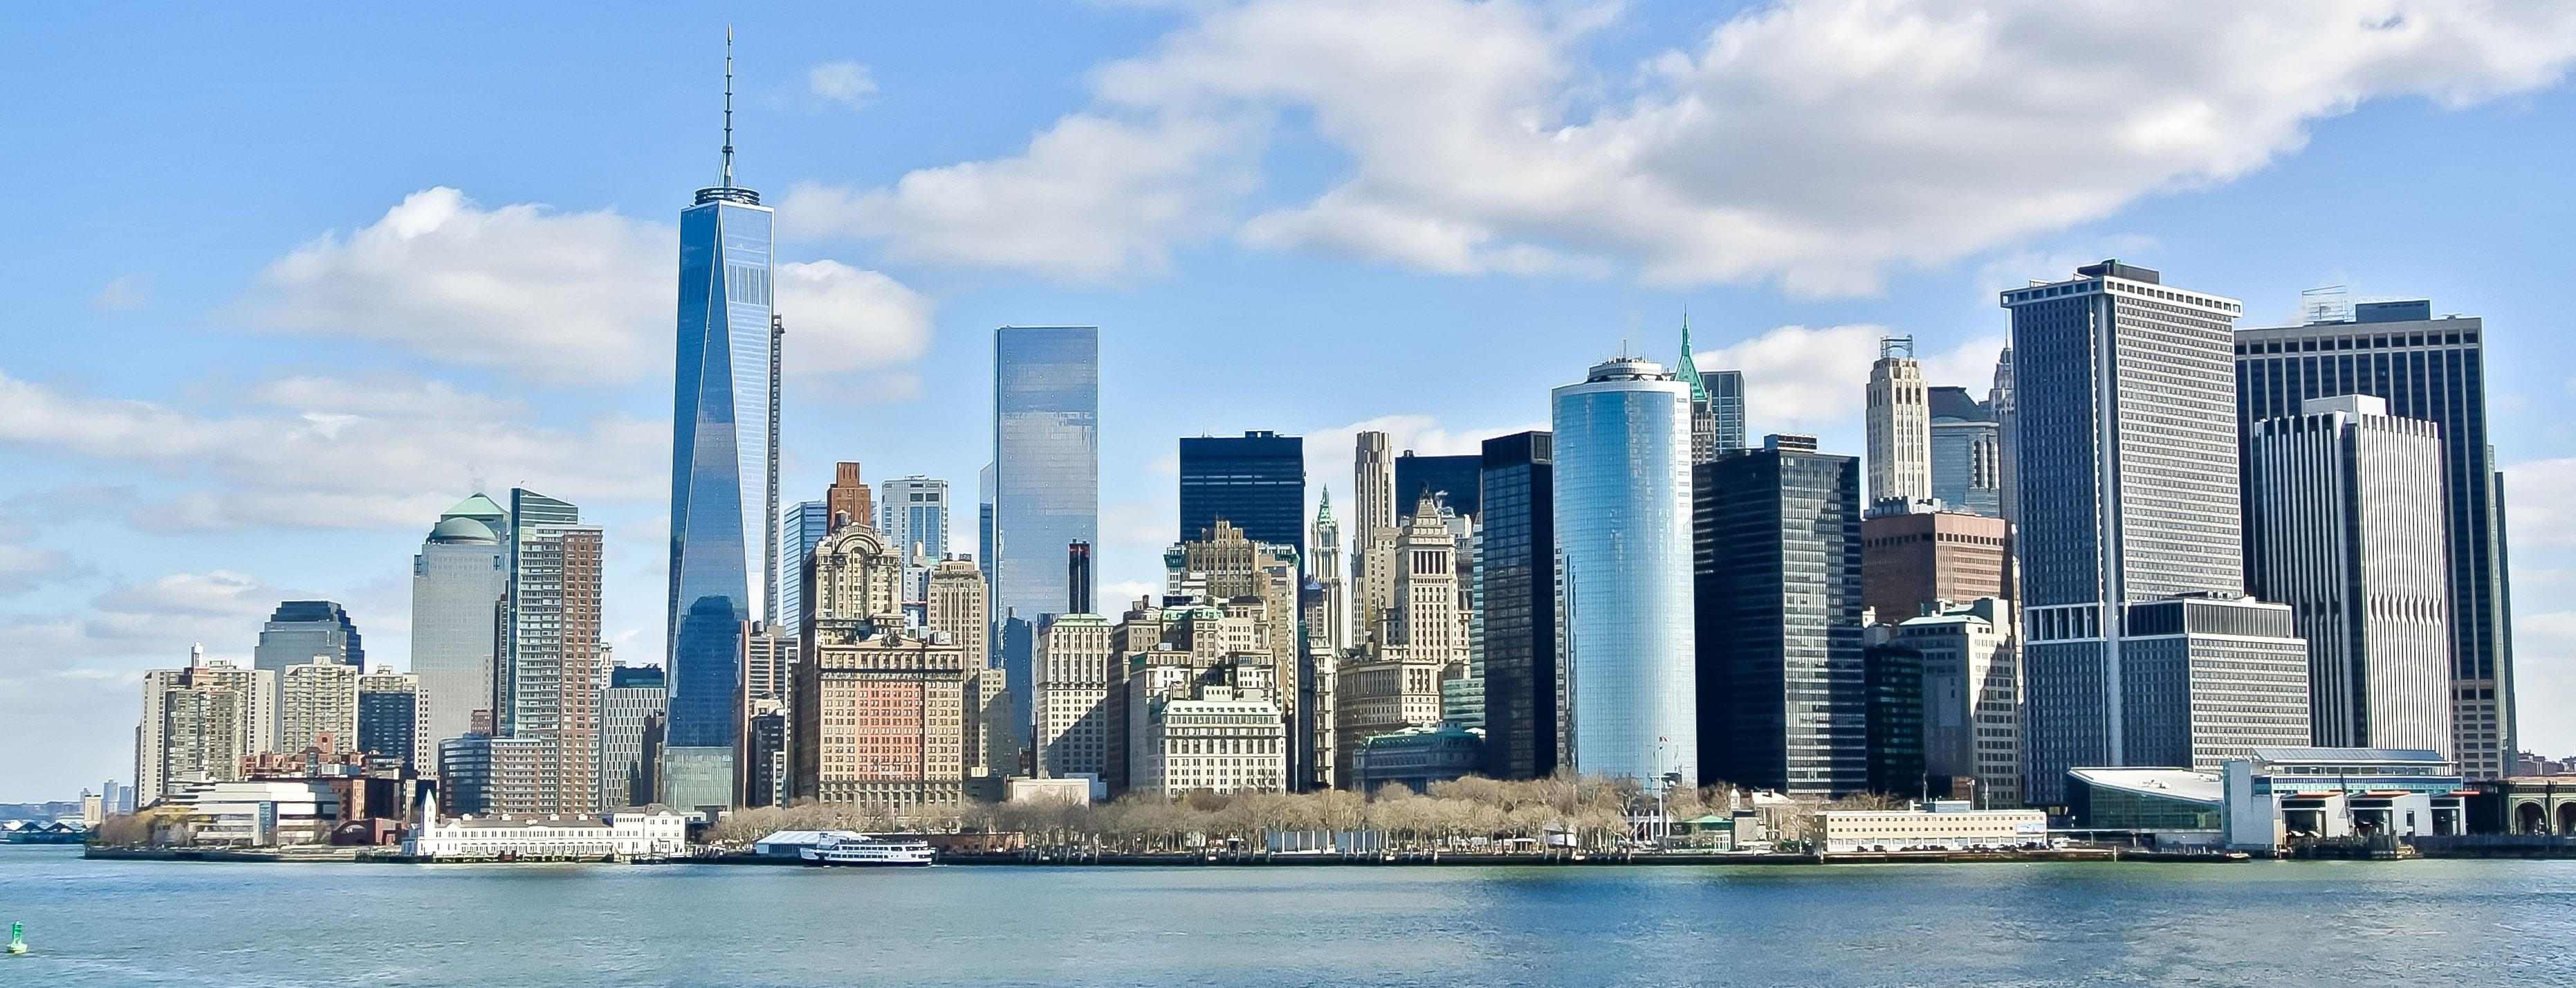 The New York City skyline on a beautiful day, with the One World Trade Center building in the middle.